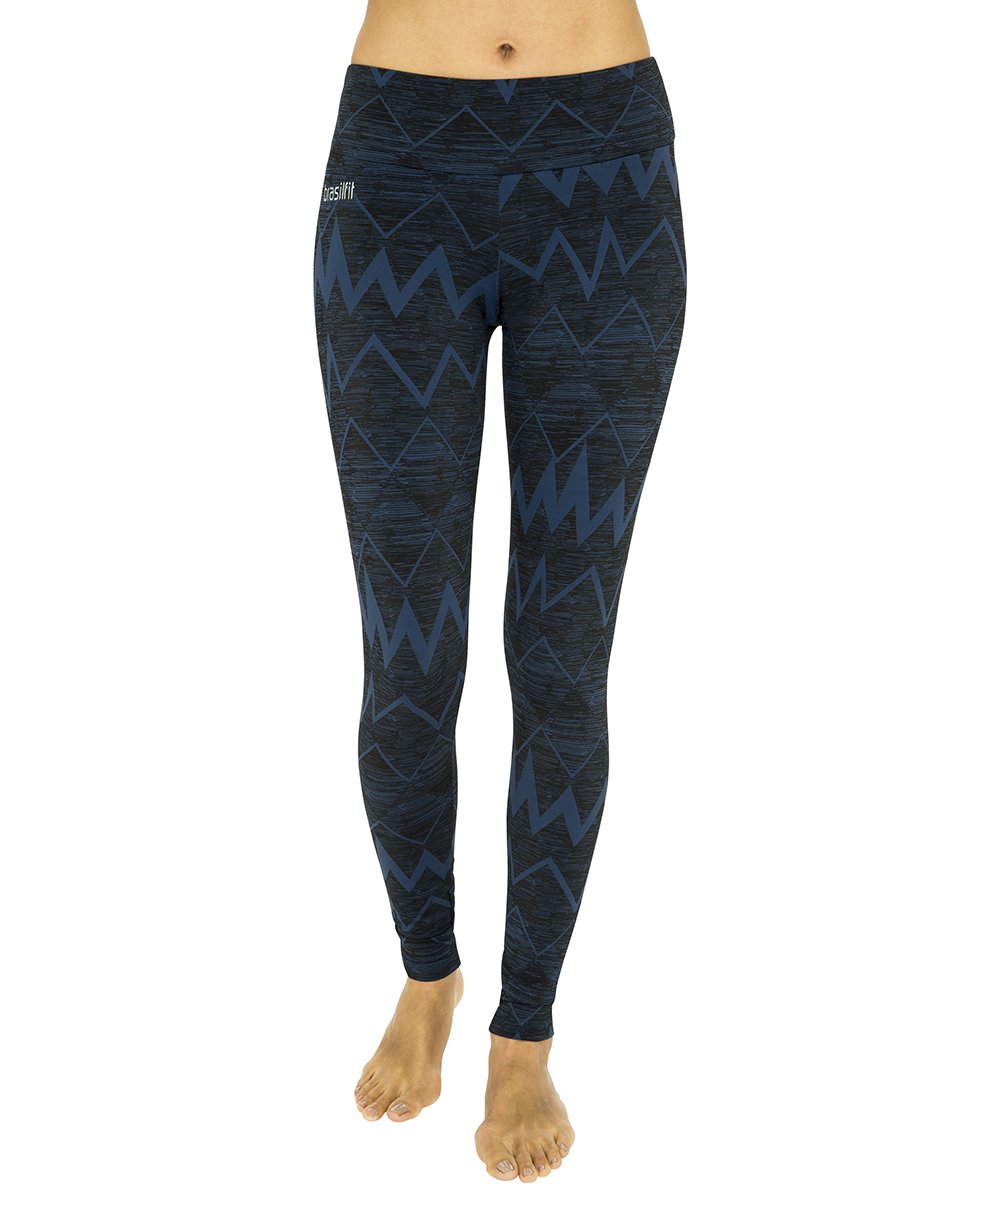 Side view product image for Brasilfit Jupiter Full Length activewear leggings.  Jupiter leggings are part of our textured activewear legging collection that is focused on performance, high compression activewear.